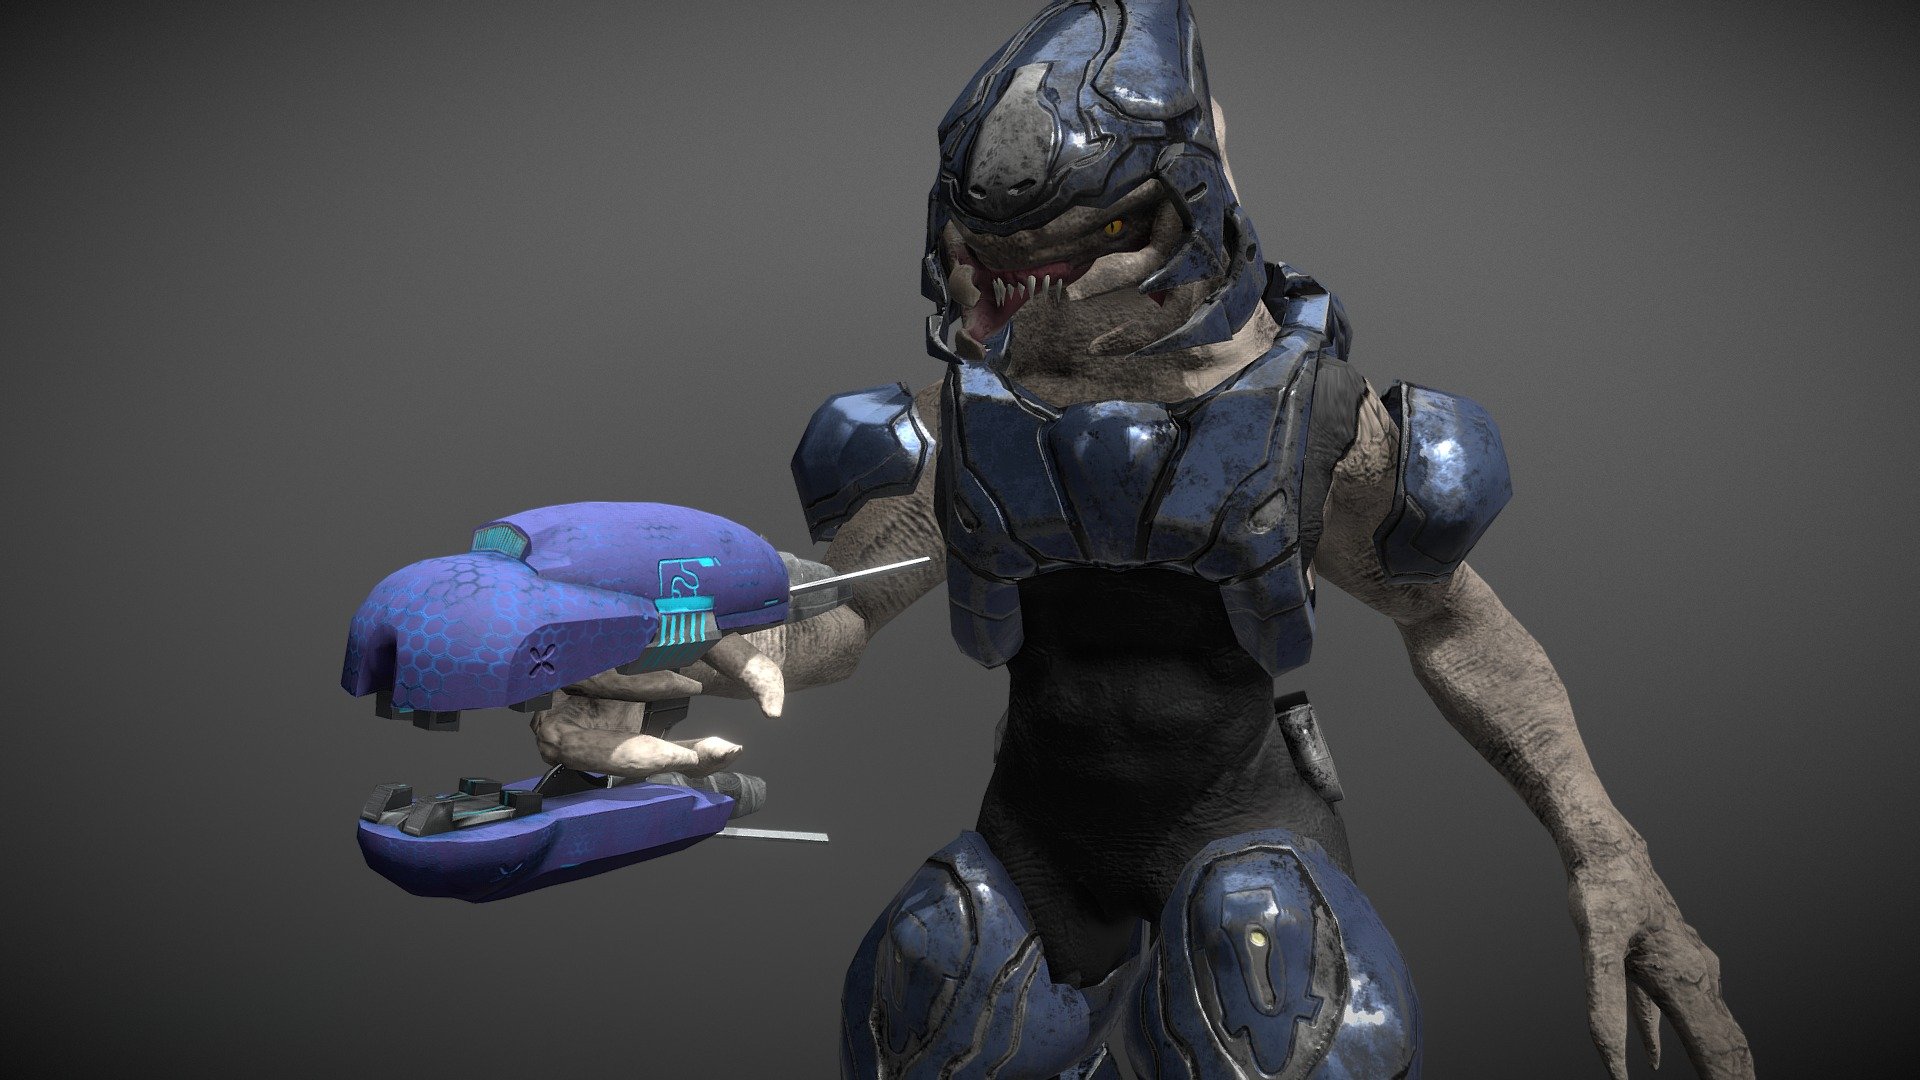 Halo 4 Elite - 3D model by Kevin Soria (@kevinsoria) 96eceed.